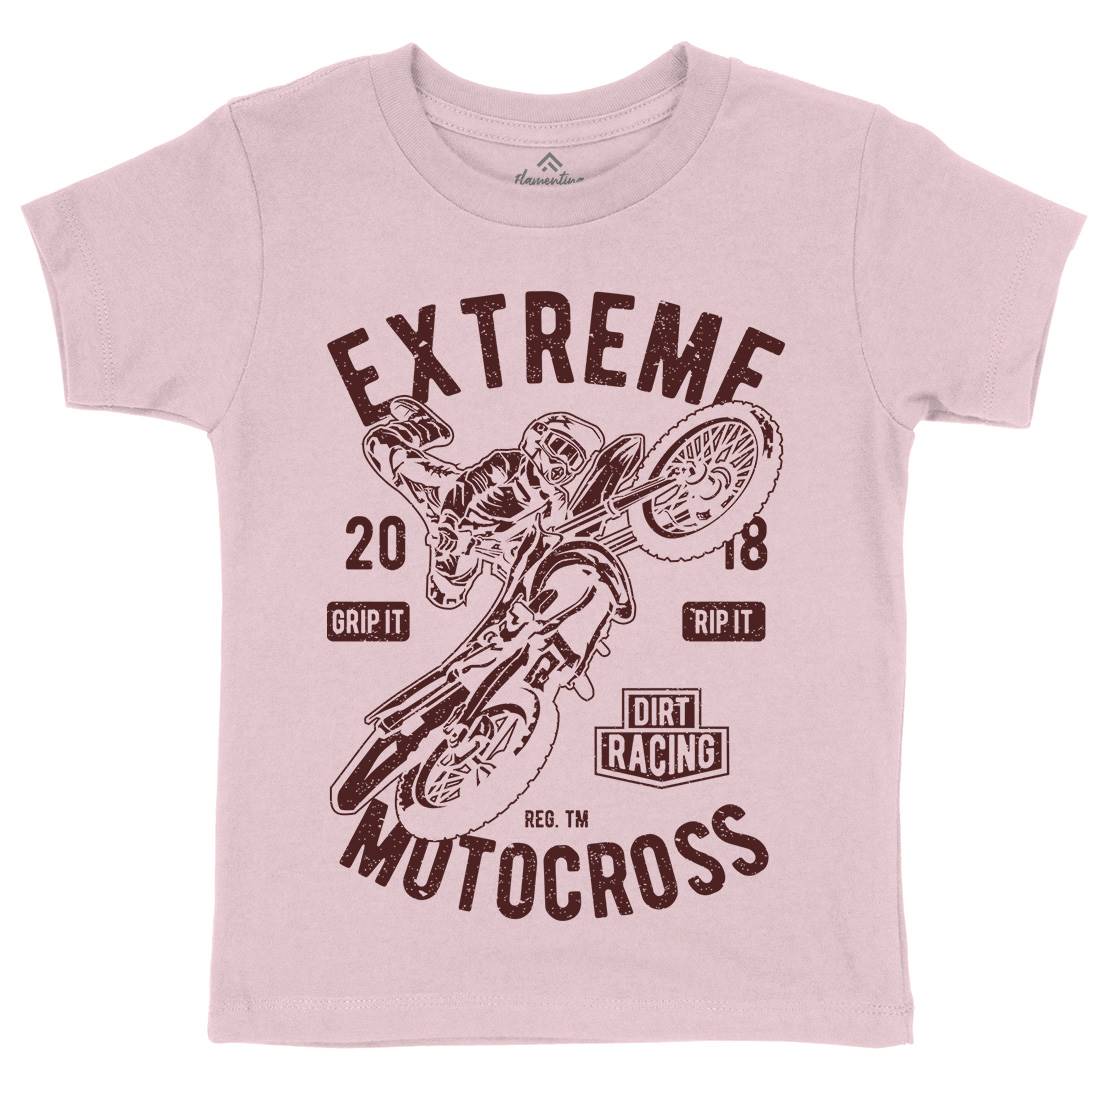 Extreme Motocross Kids Crew Neck T-Shirt Motorcycles A651